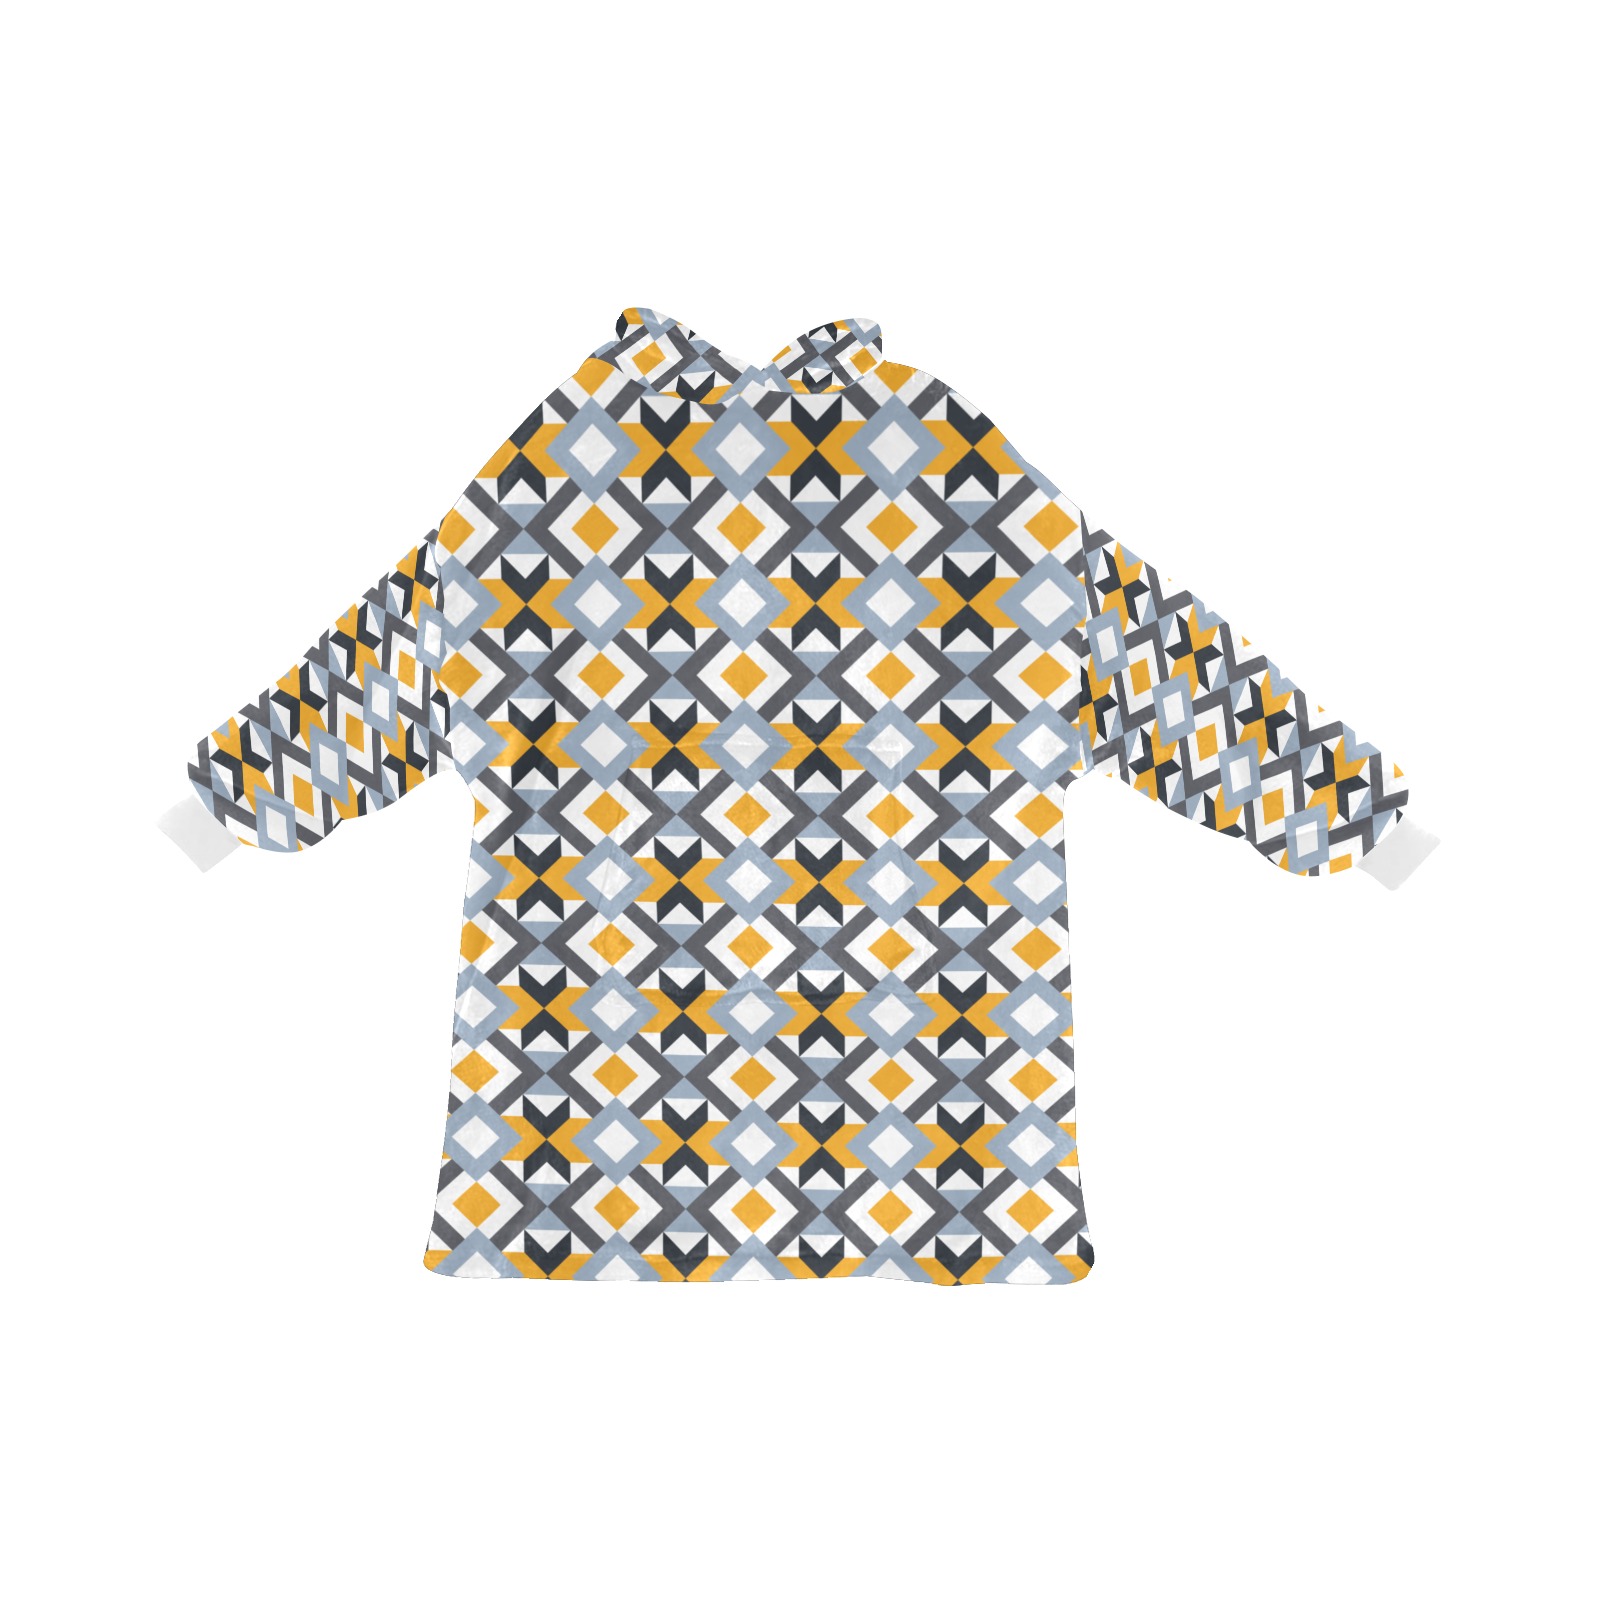 Retro Angles Abstract Geometric Pattern Blanket Hoodie for Women